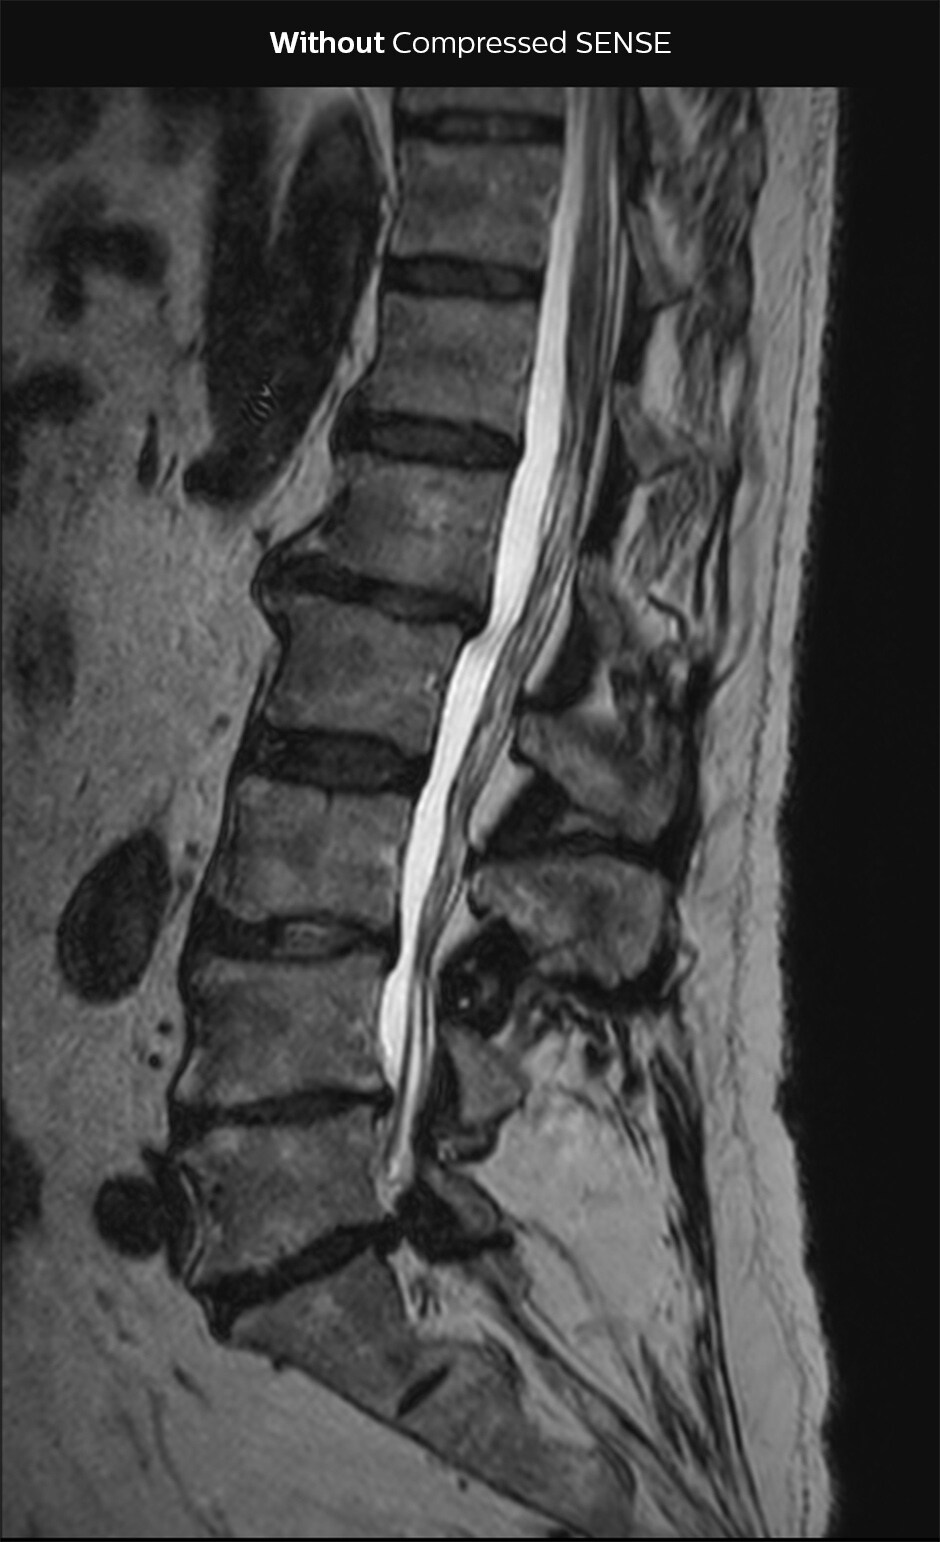 3D T2 SpineVIEW lumbar spine WITHOUT Compressed SENSE